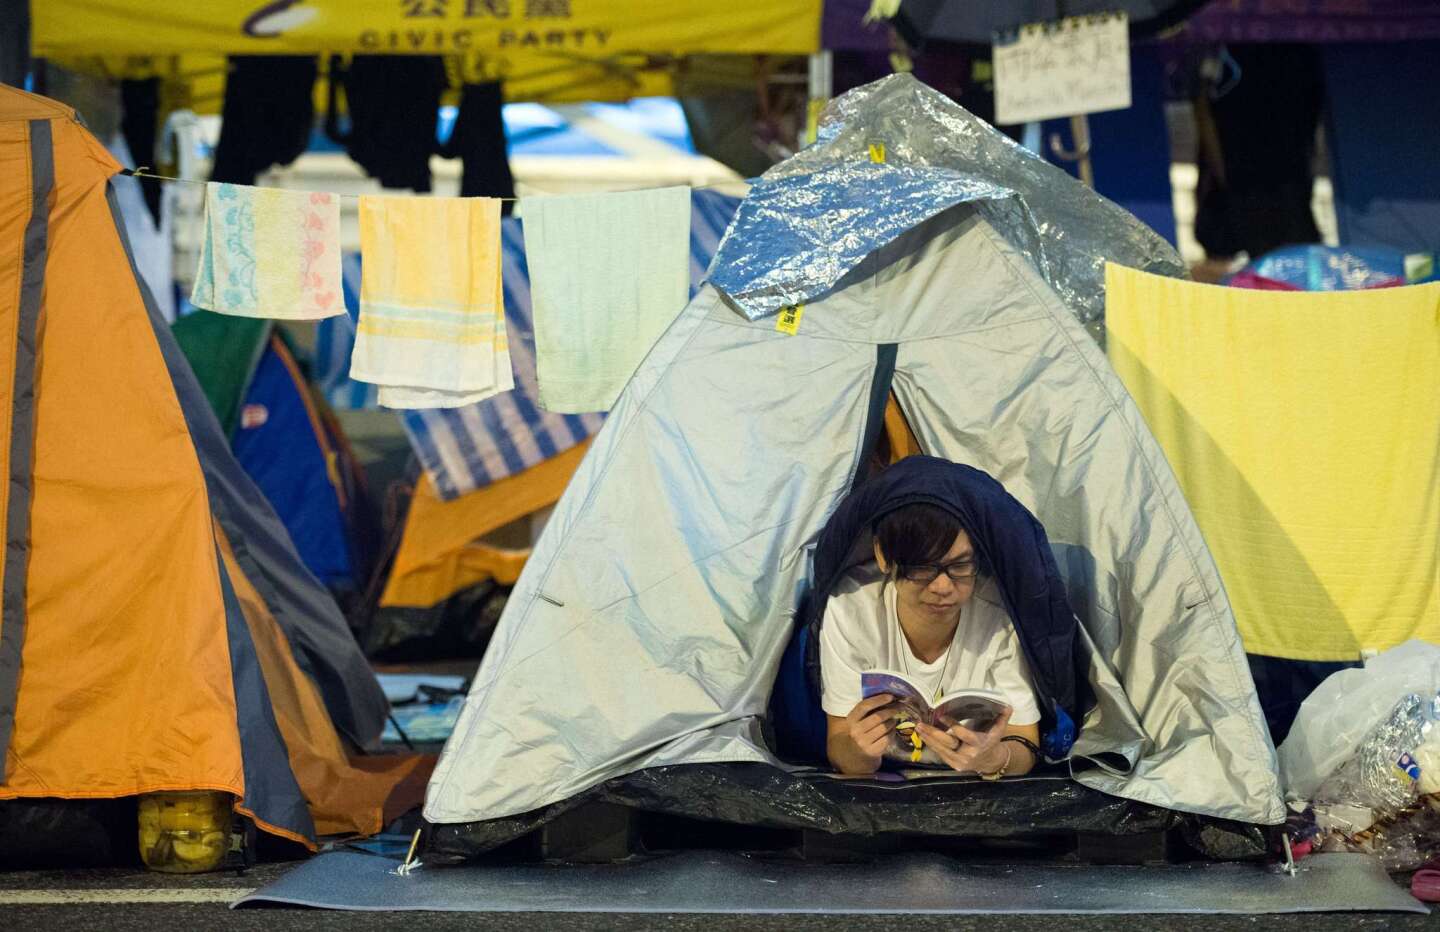 A student reads a book in his tent at the pro-democracy movement's main protest site in the Admiralty district of Hong Kong on Dec. 2.